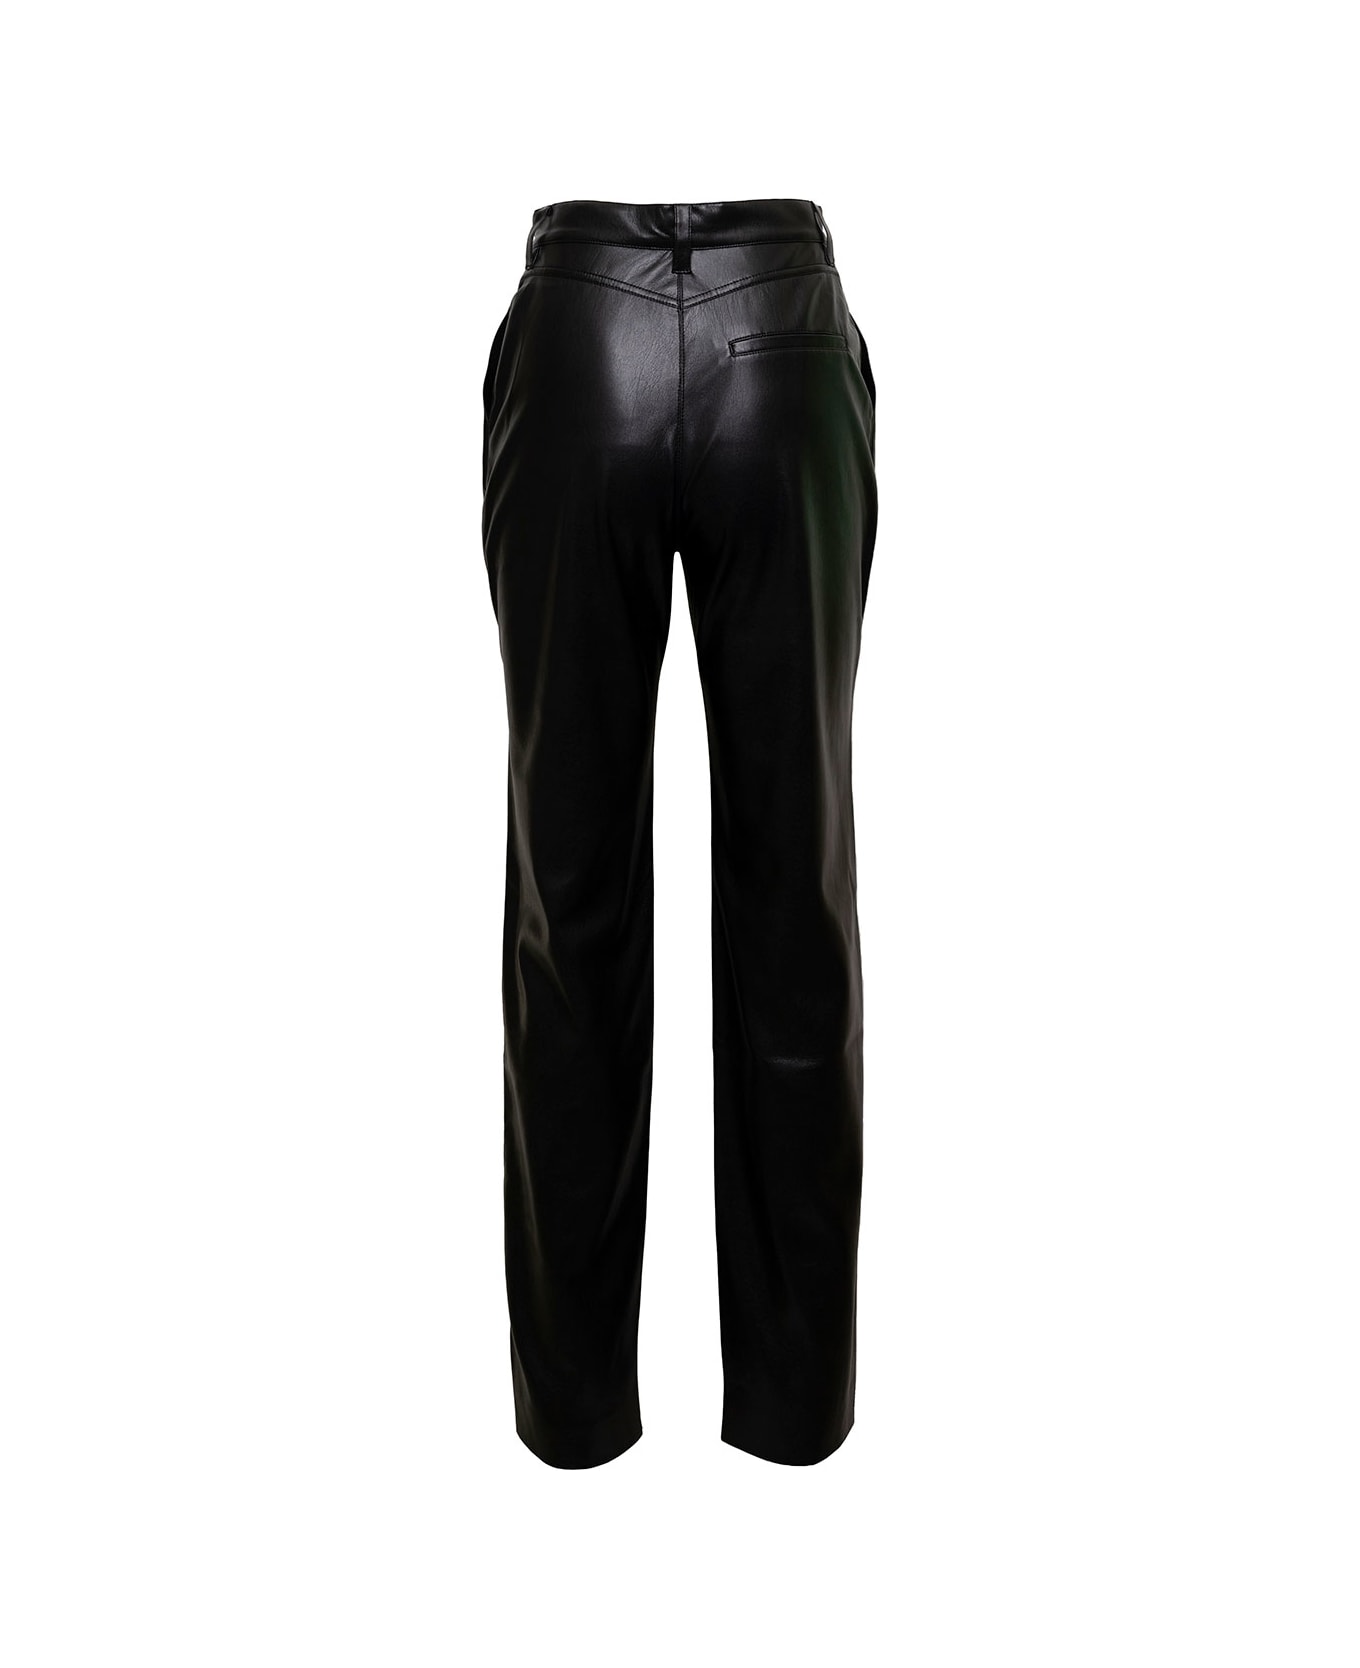 Nanushka Black Slim Pants With Slits At The Front In Faux Leather Woman - Black